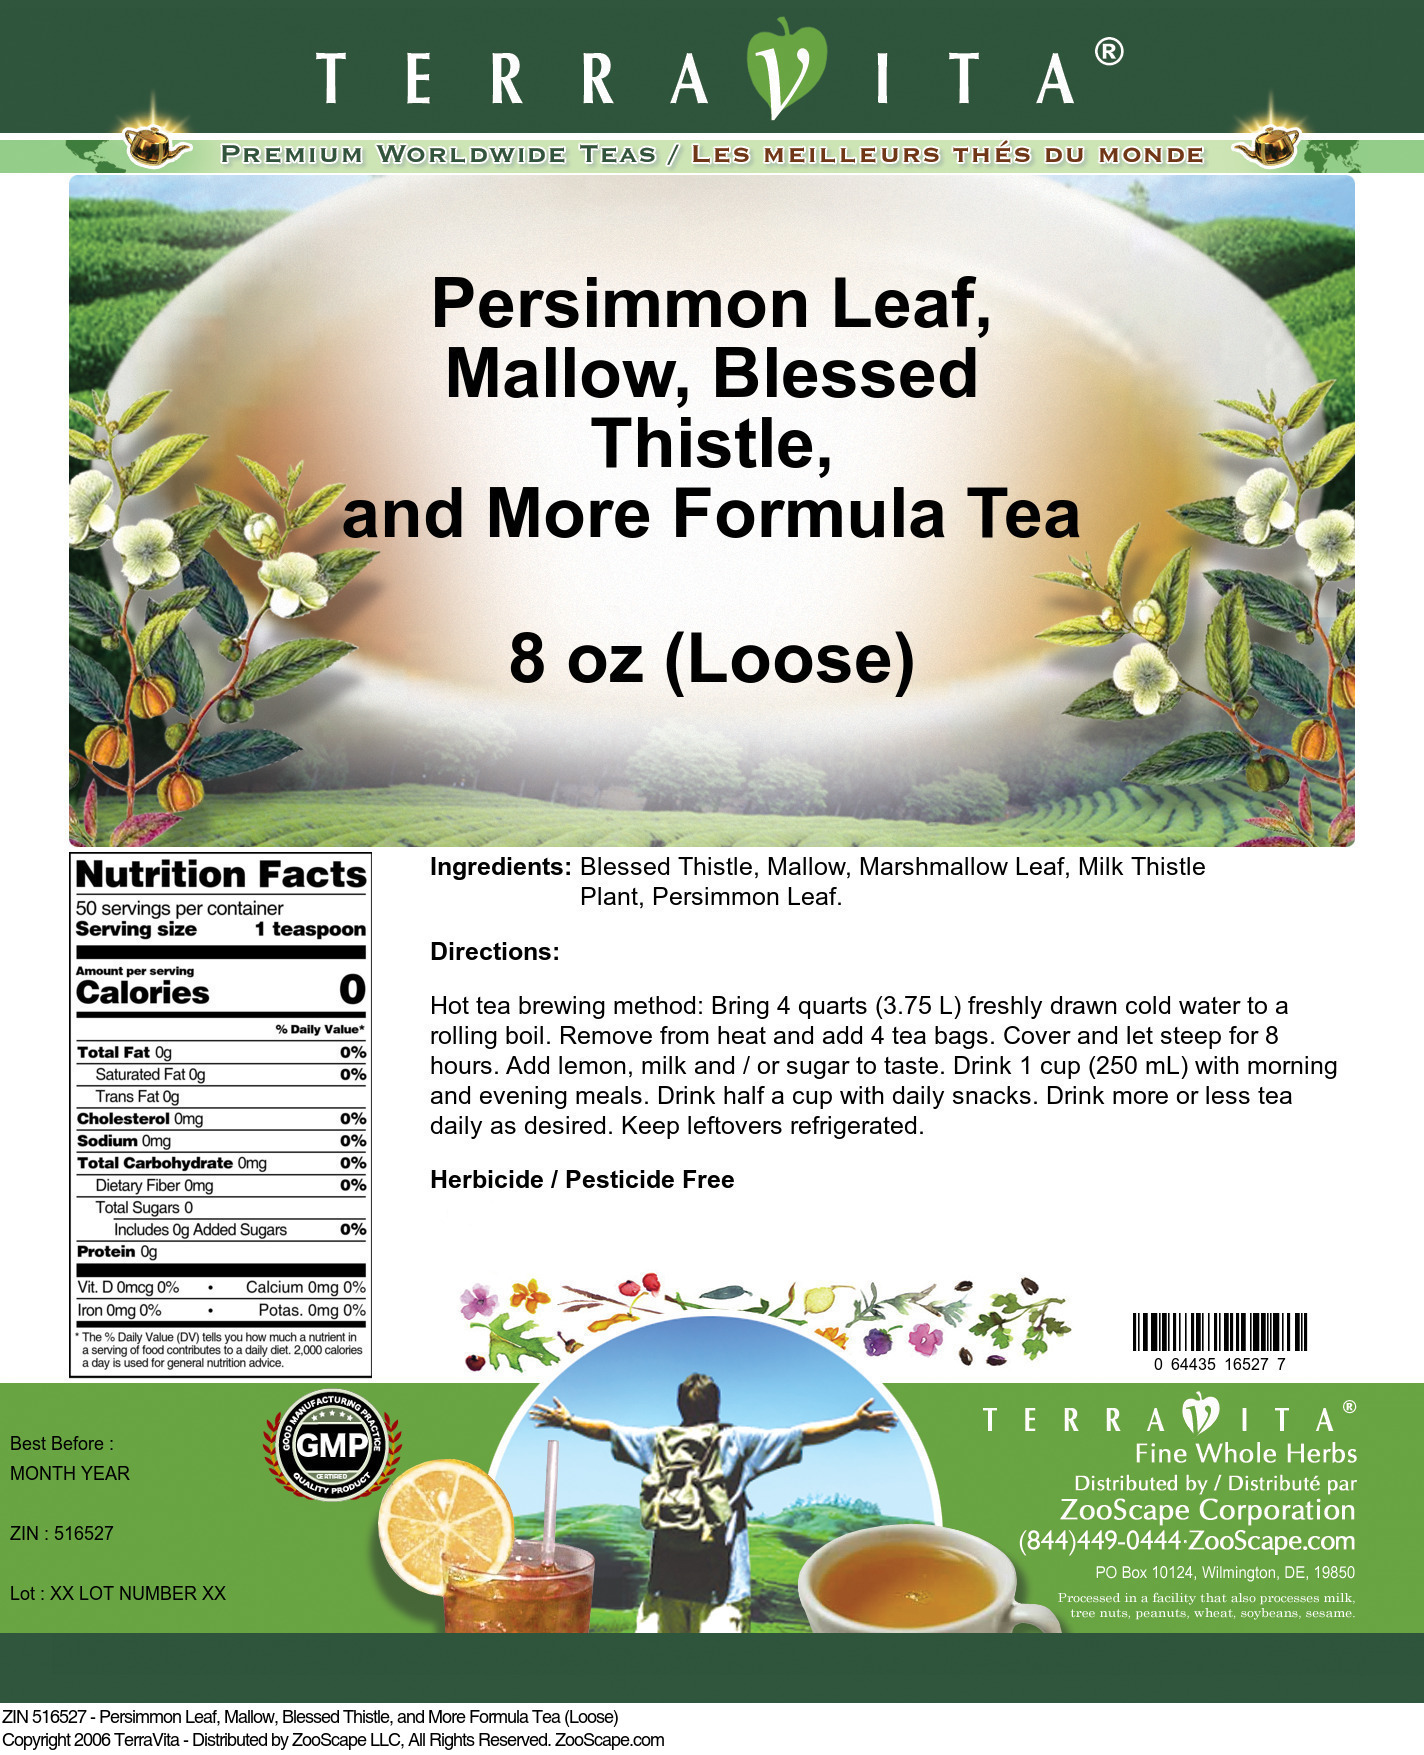 Persimmon Leaf, Mallow, Blessed Thistle, and More Formula Tea (Loose) - Label